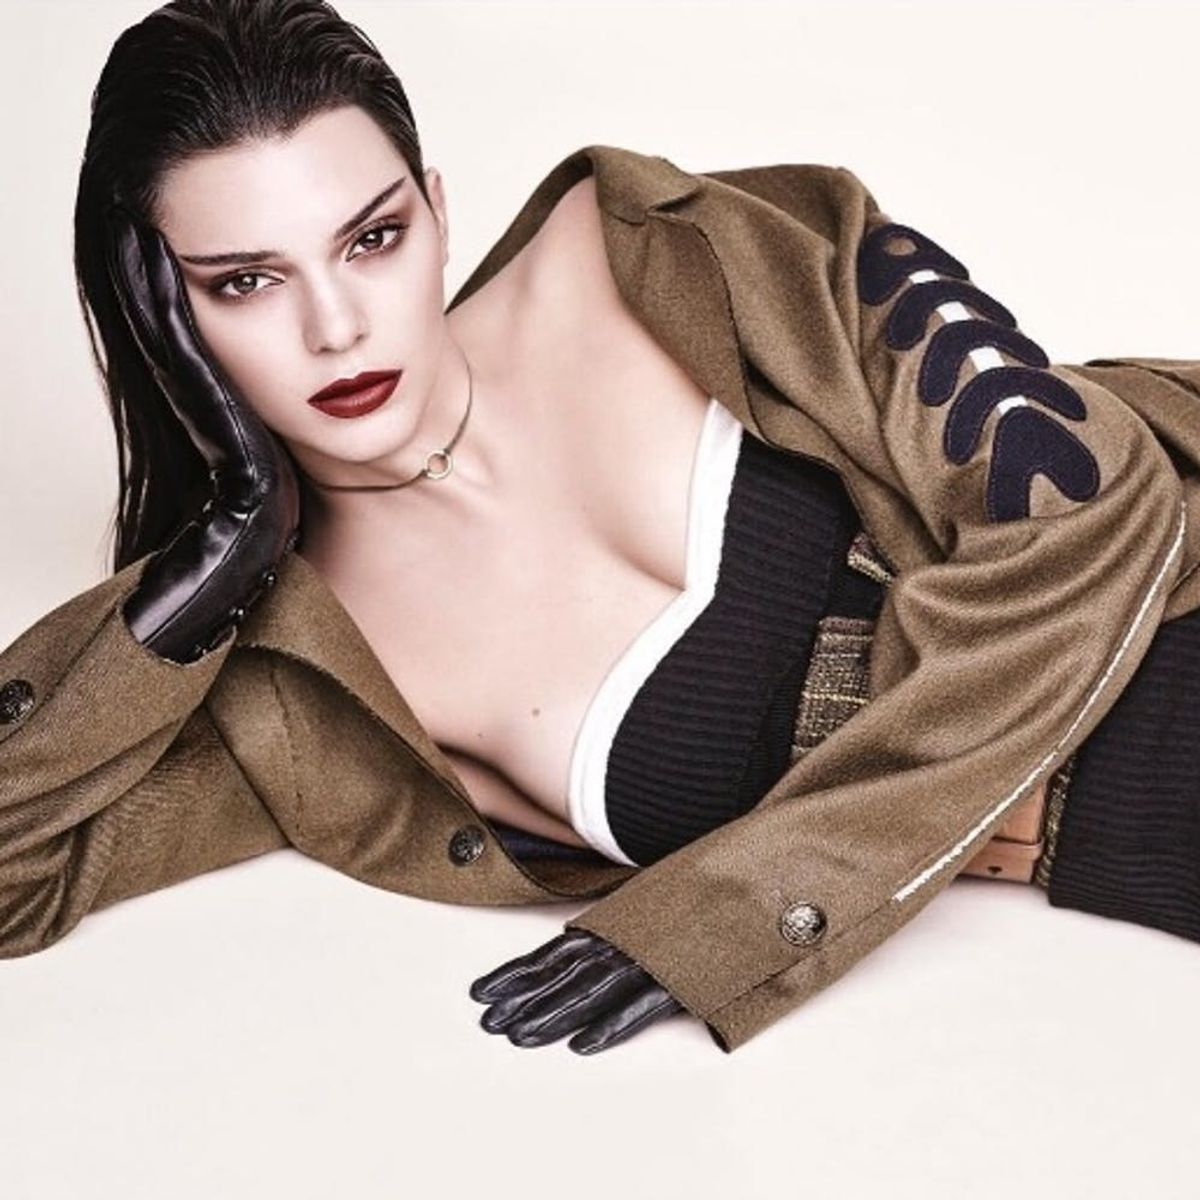 Kendall Jenner Is Back on Instagram After Her Digital Detox (But Not How You’d Expect)